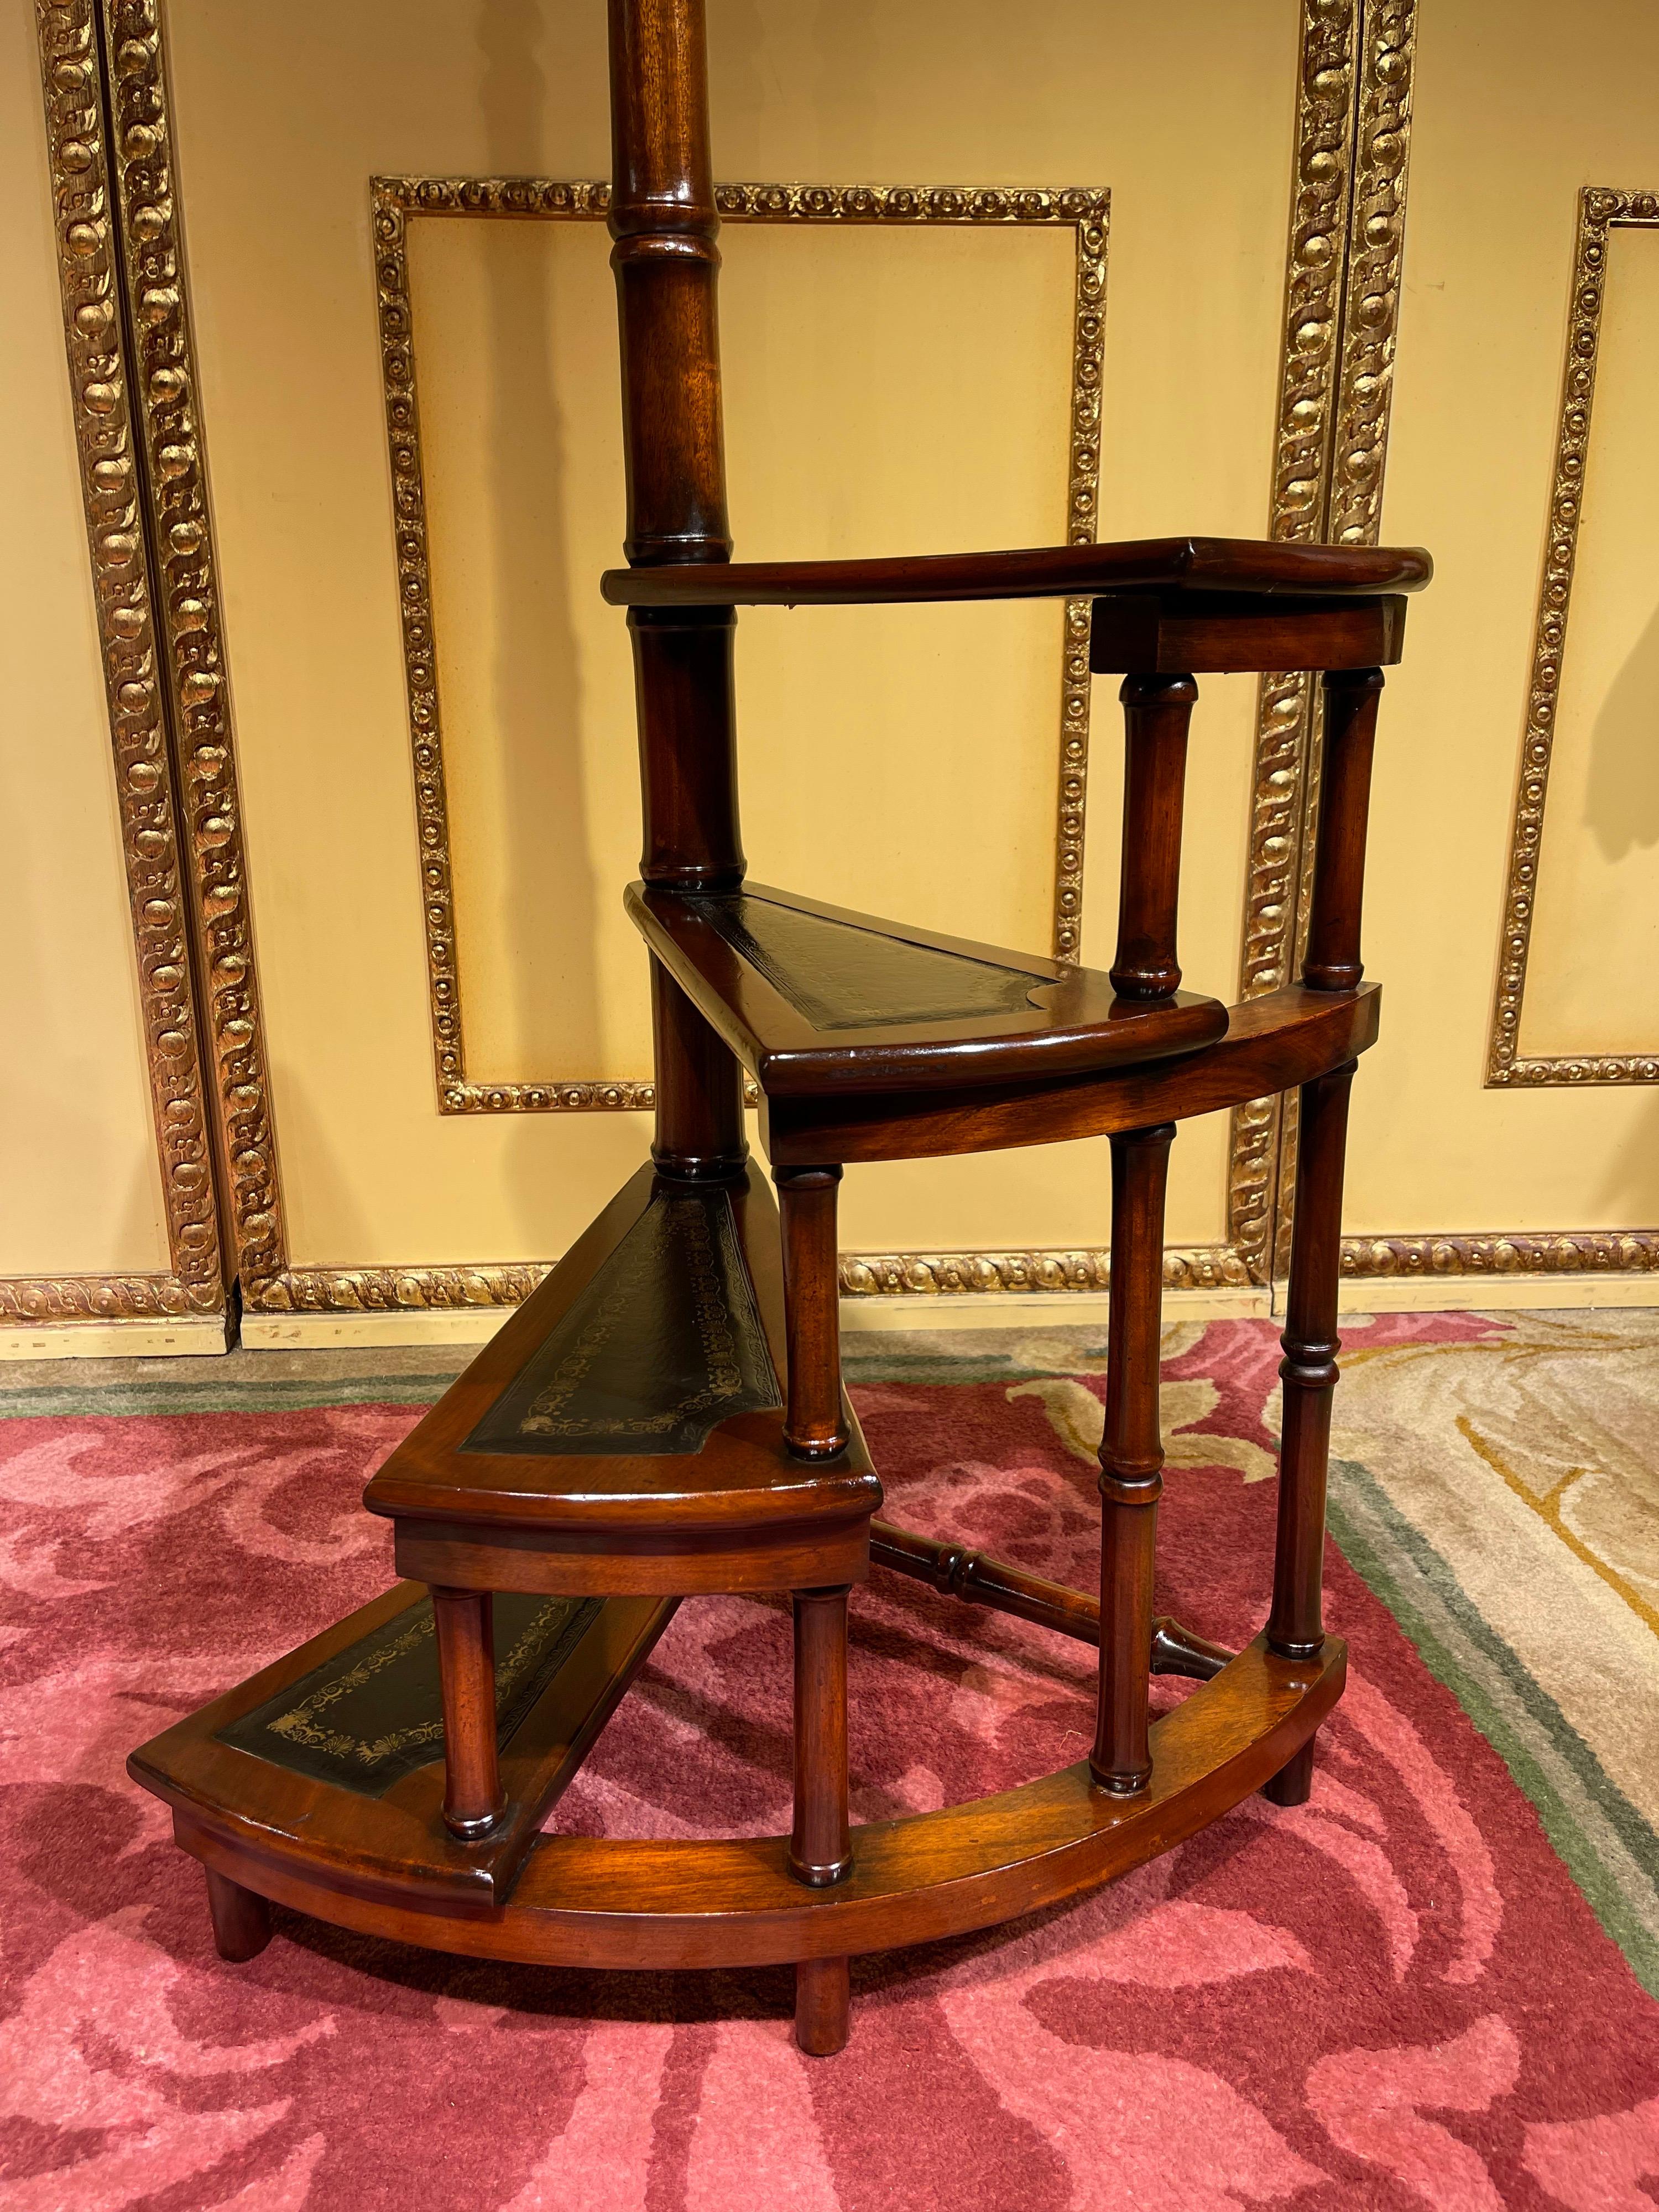 20th Century English Leather Library Step or Stairs / Stepladder, Victorian 4